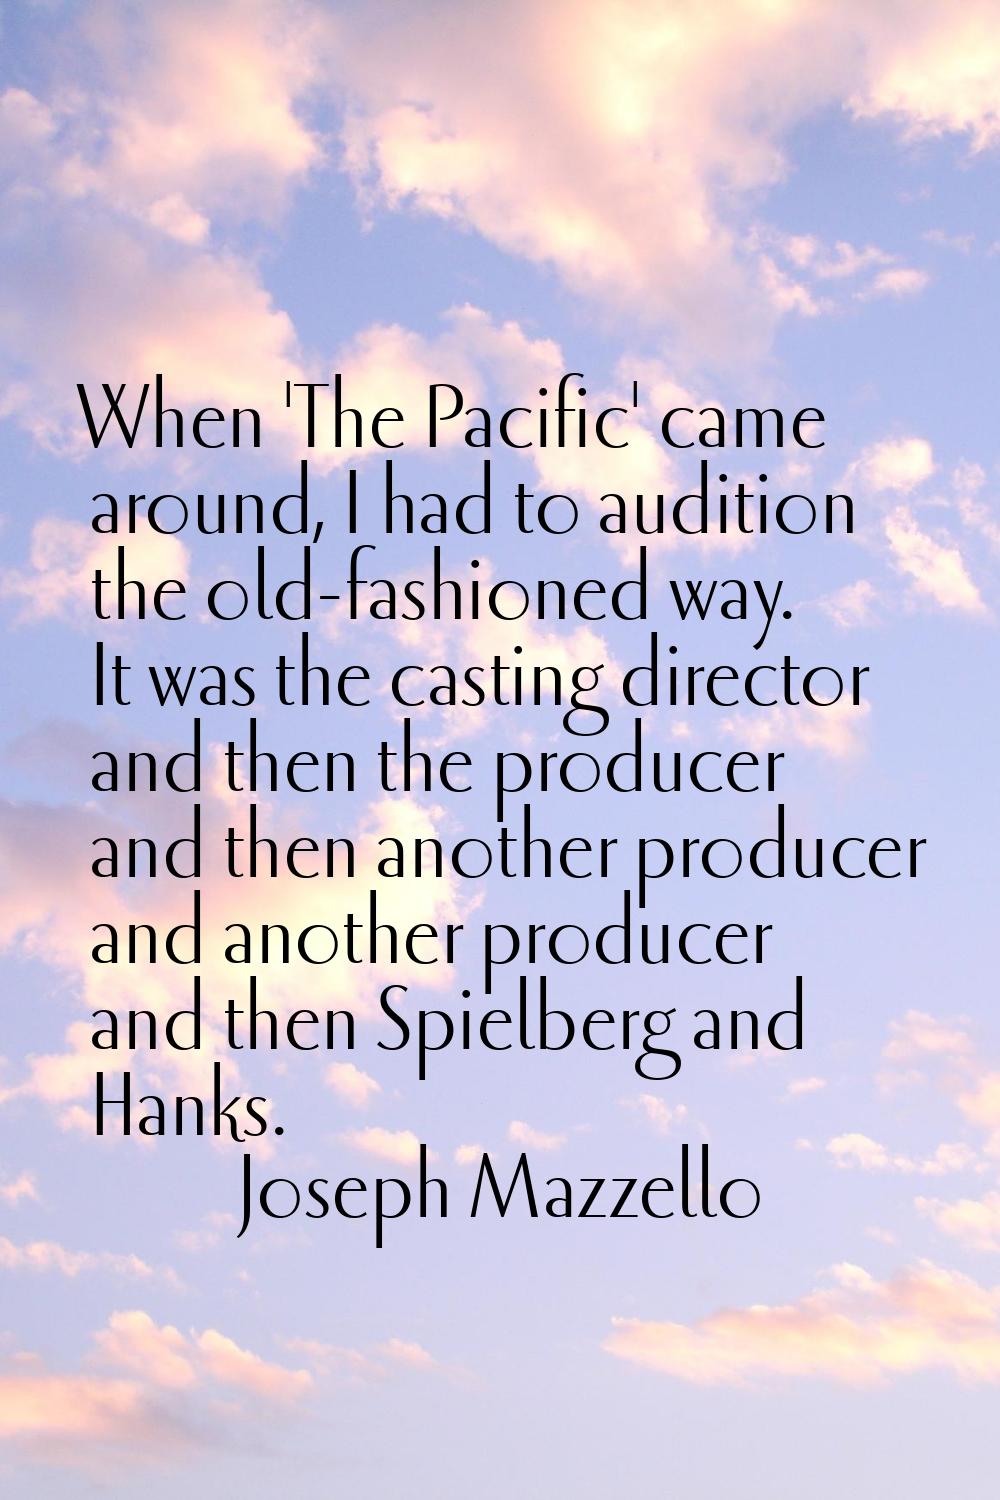 When 'The Pacific' came around, I had to audition the old-fashioned way. It was the casting directo